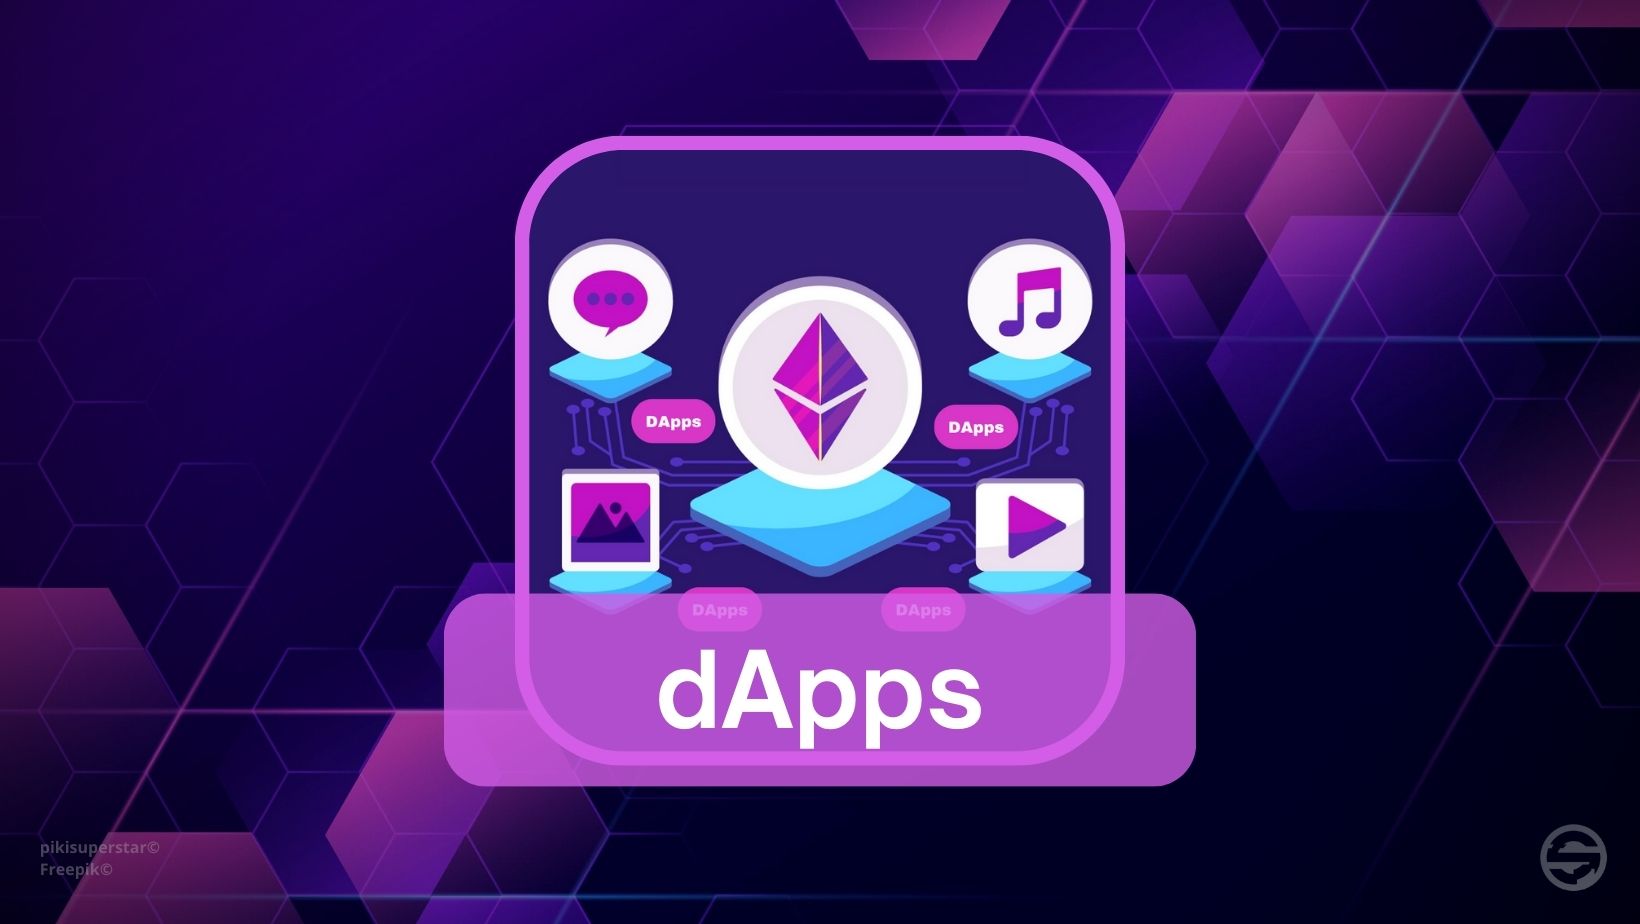 dApps: everything you need to know about decentralized applications